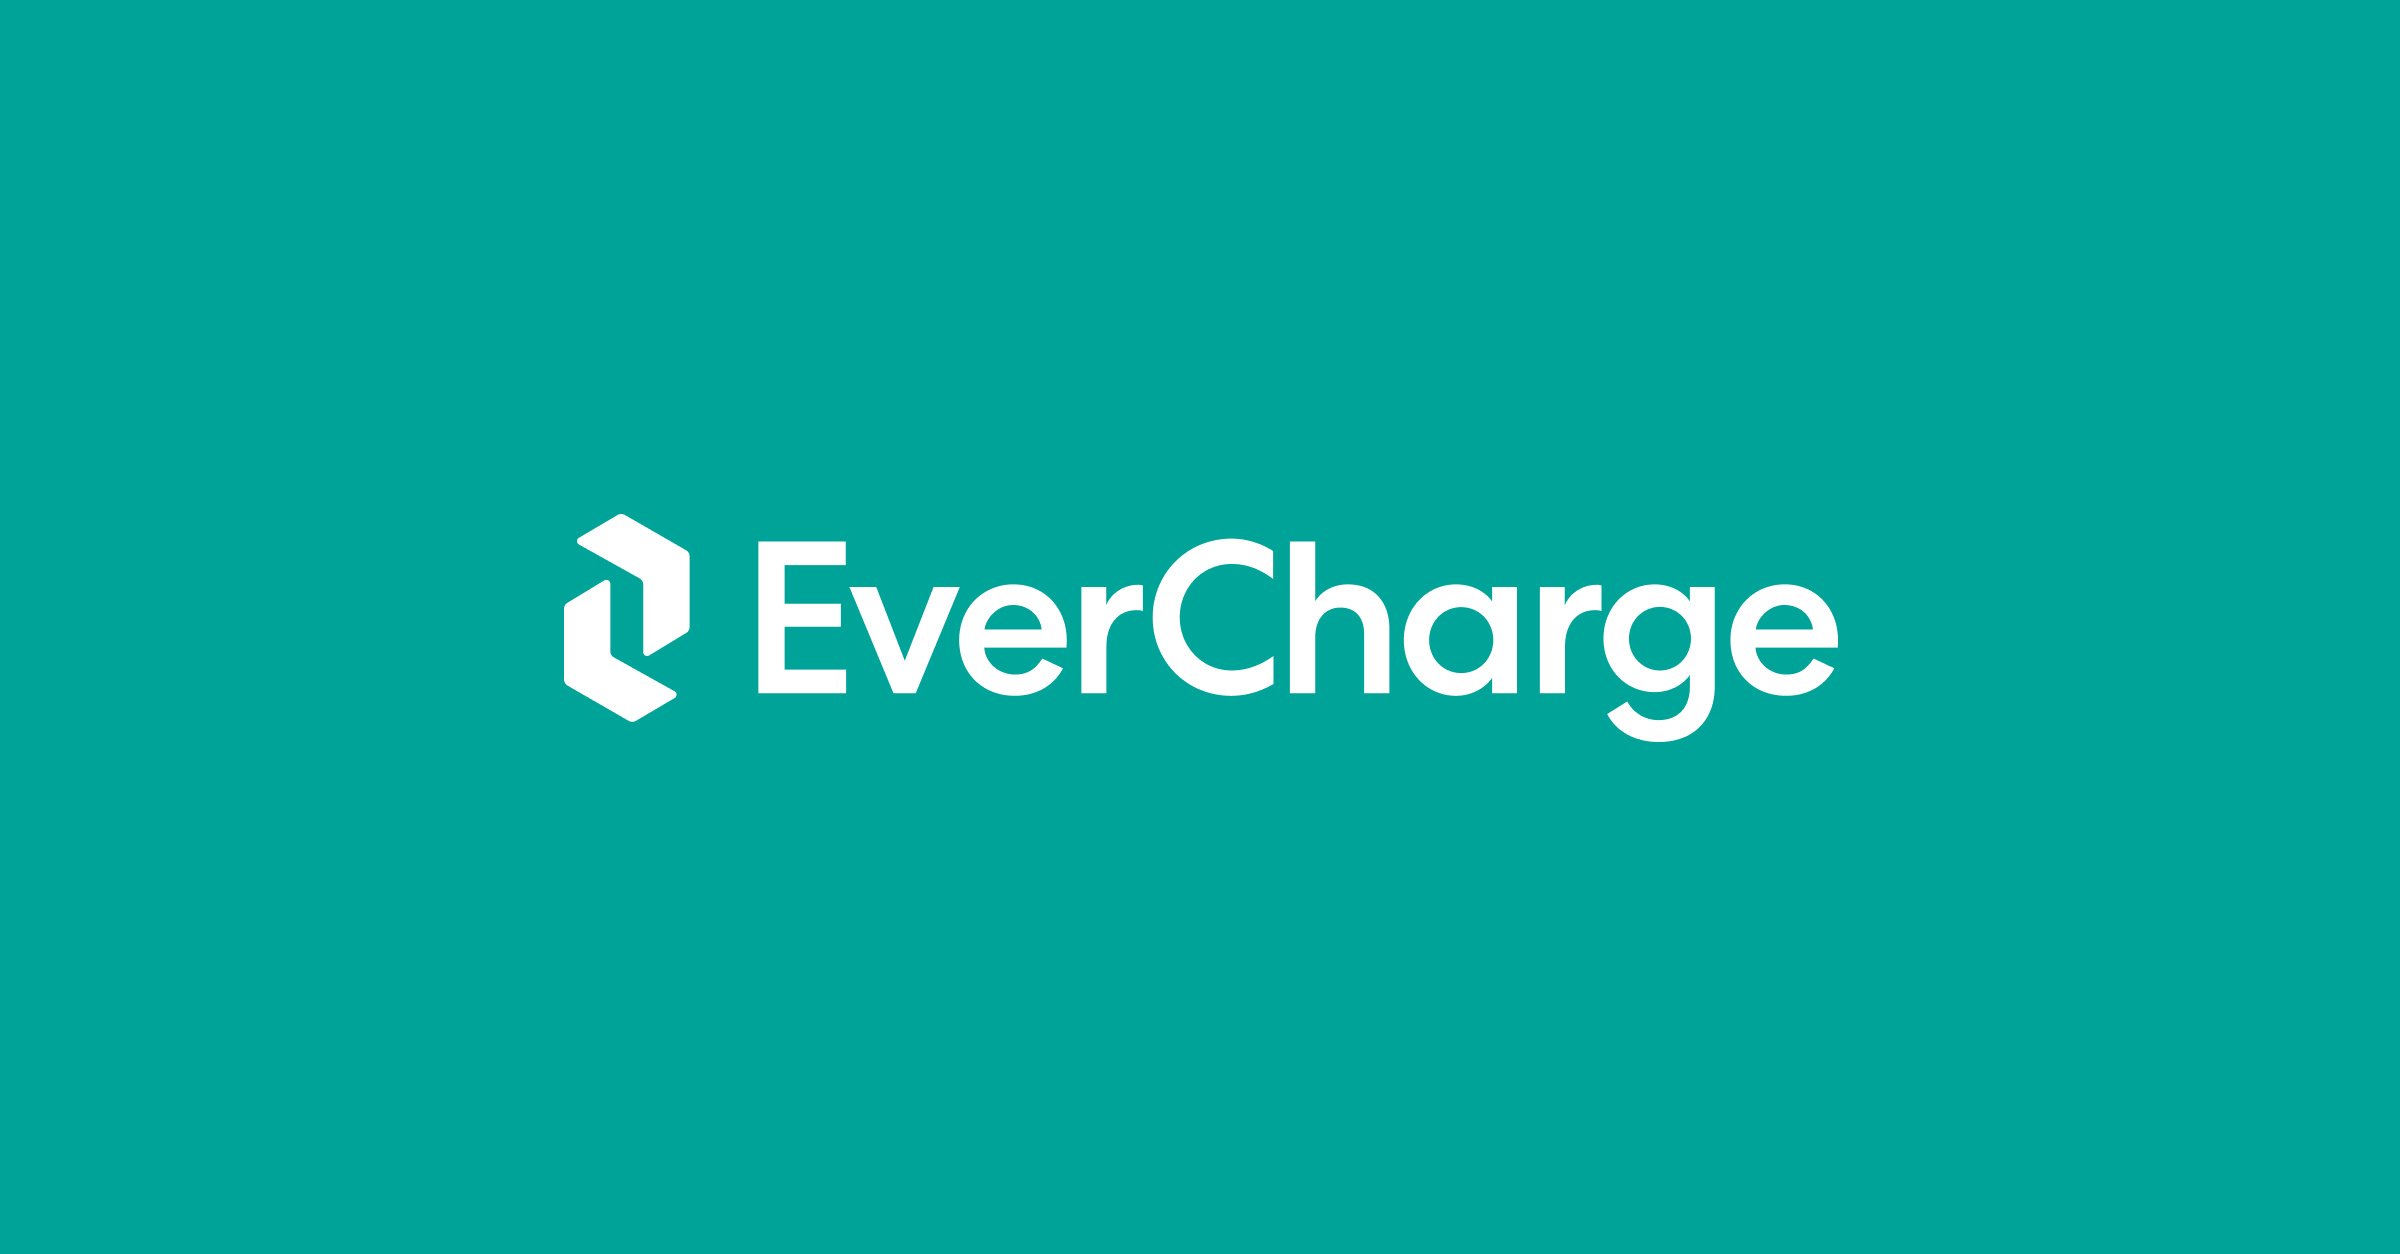 EverCharge Enters Next Growth Phase